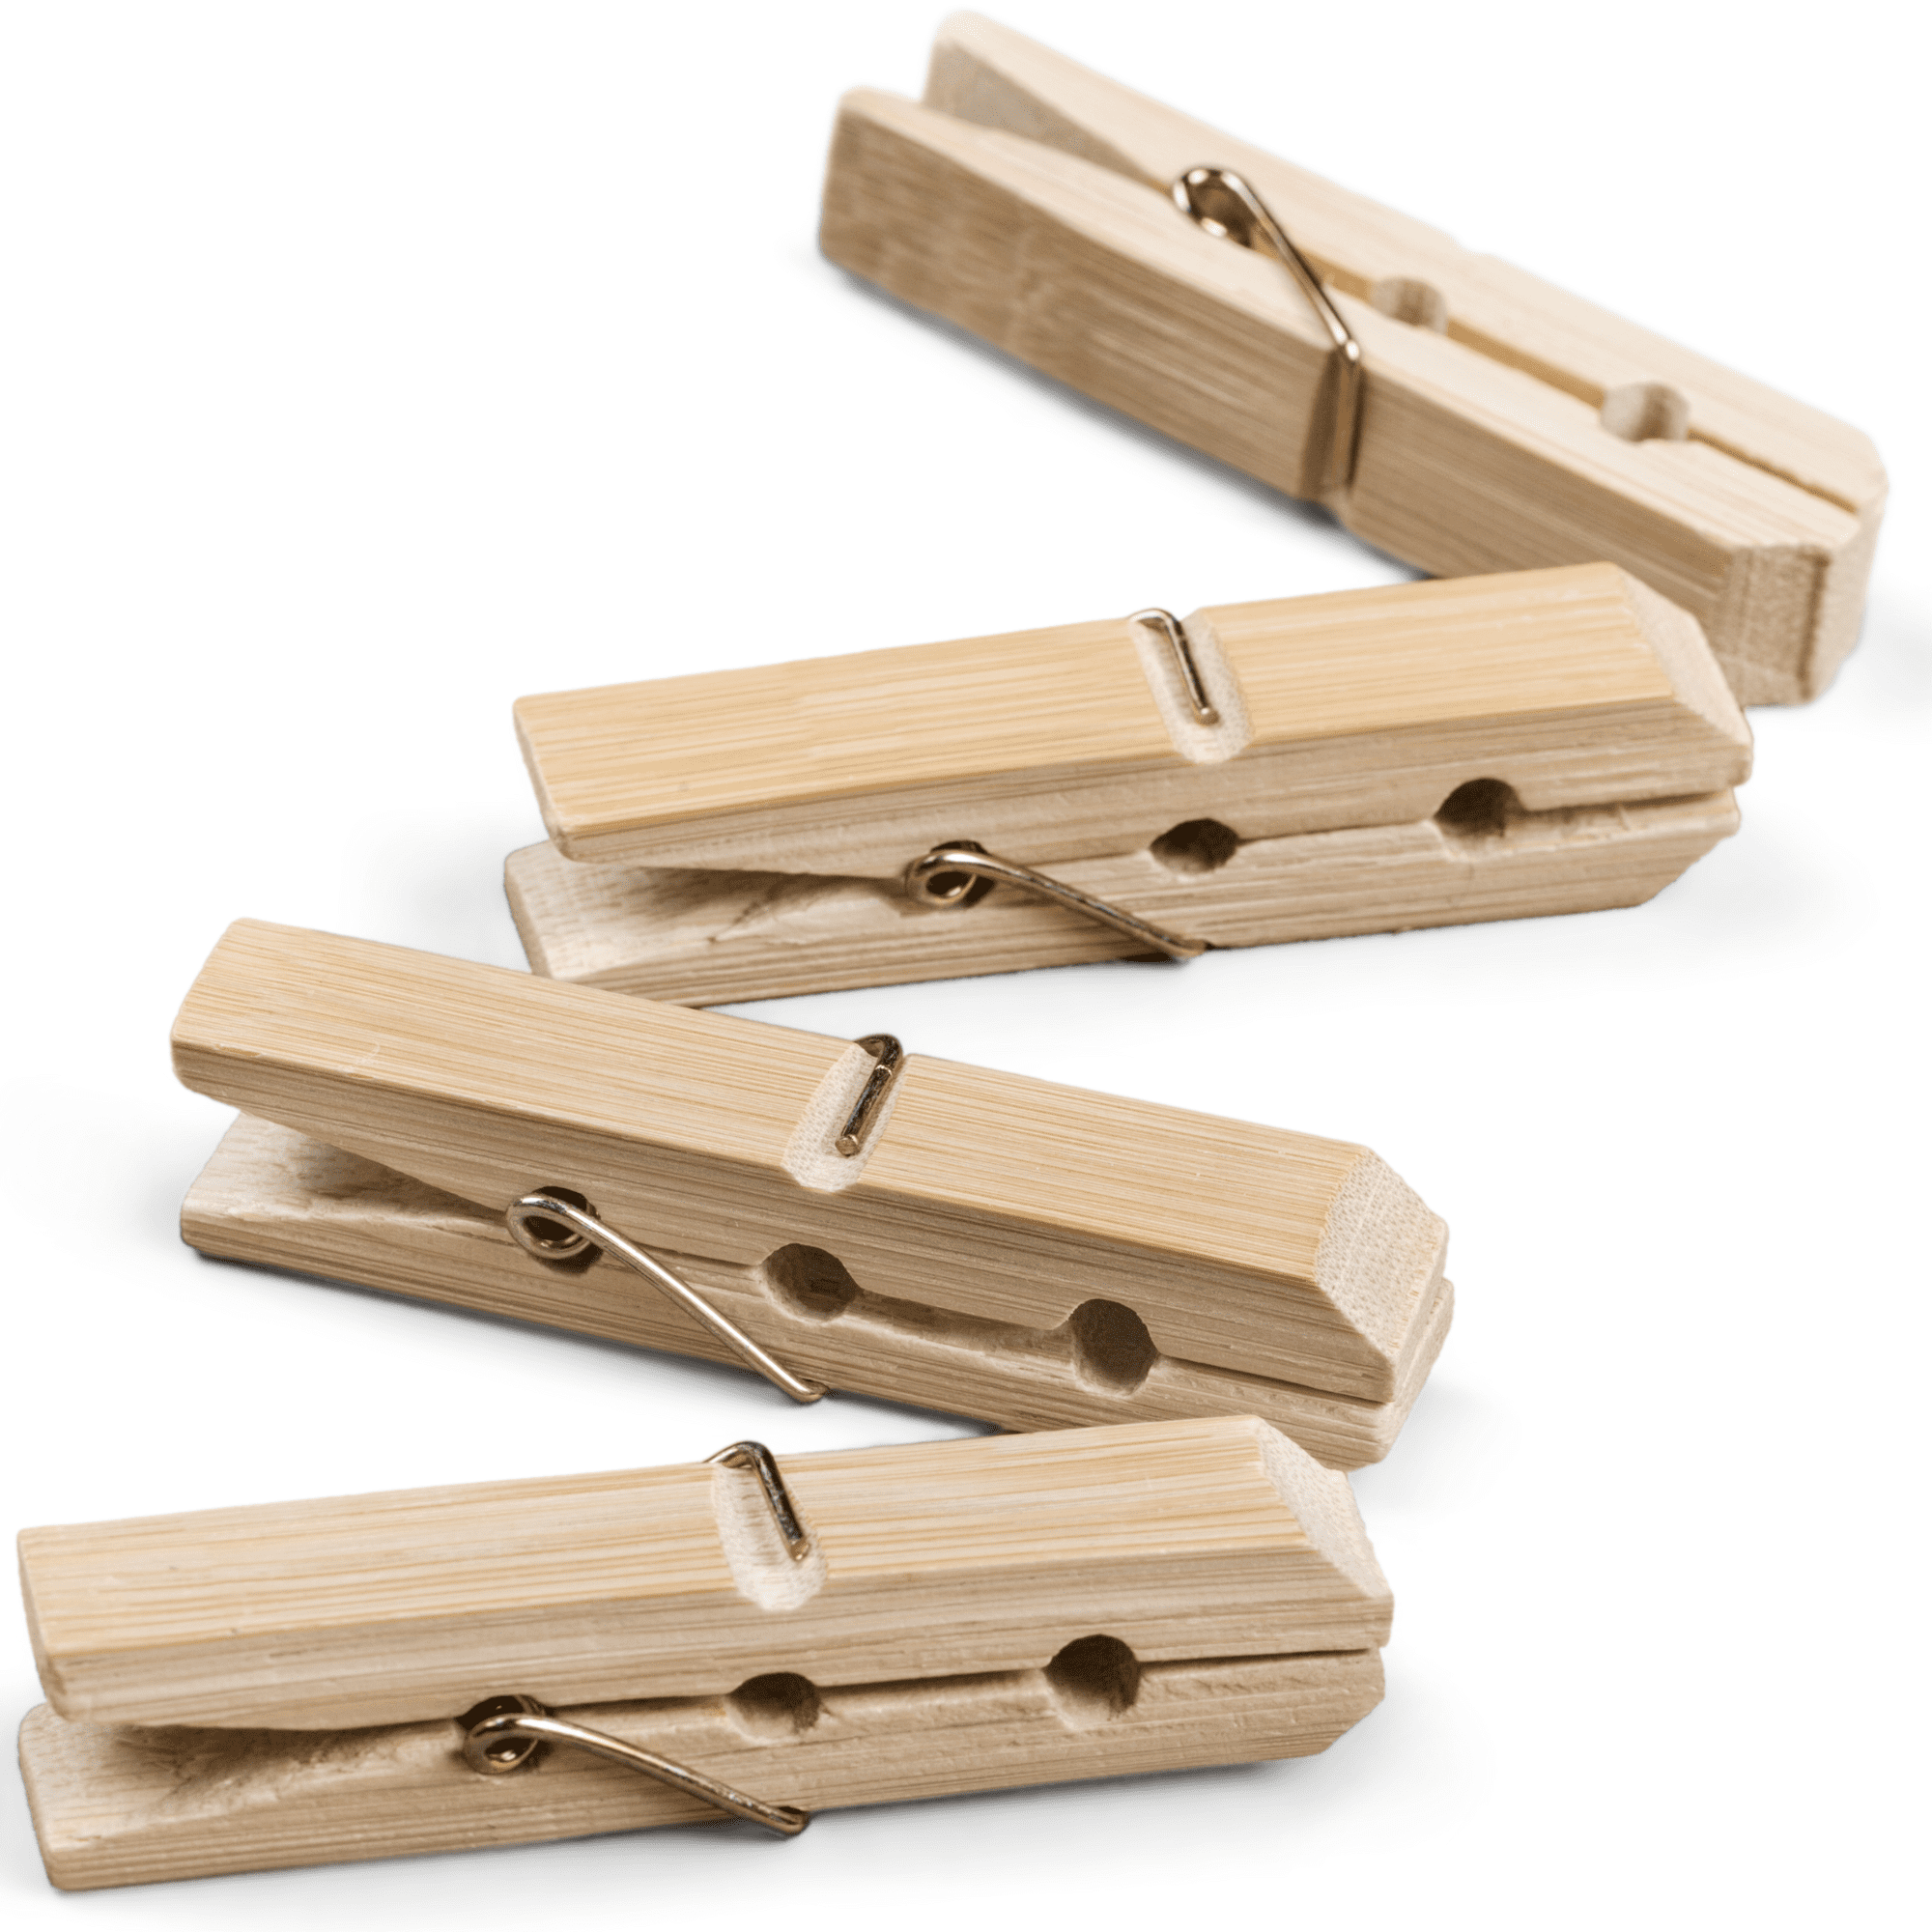 12 Packs: 18 ct. (216 total) 3.5 Wood Clothespins by Creatology